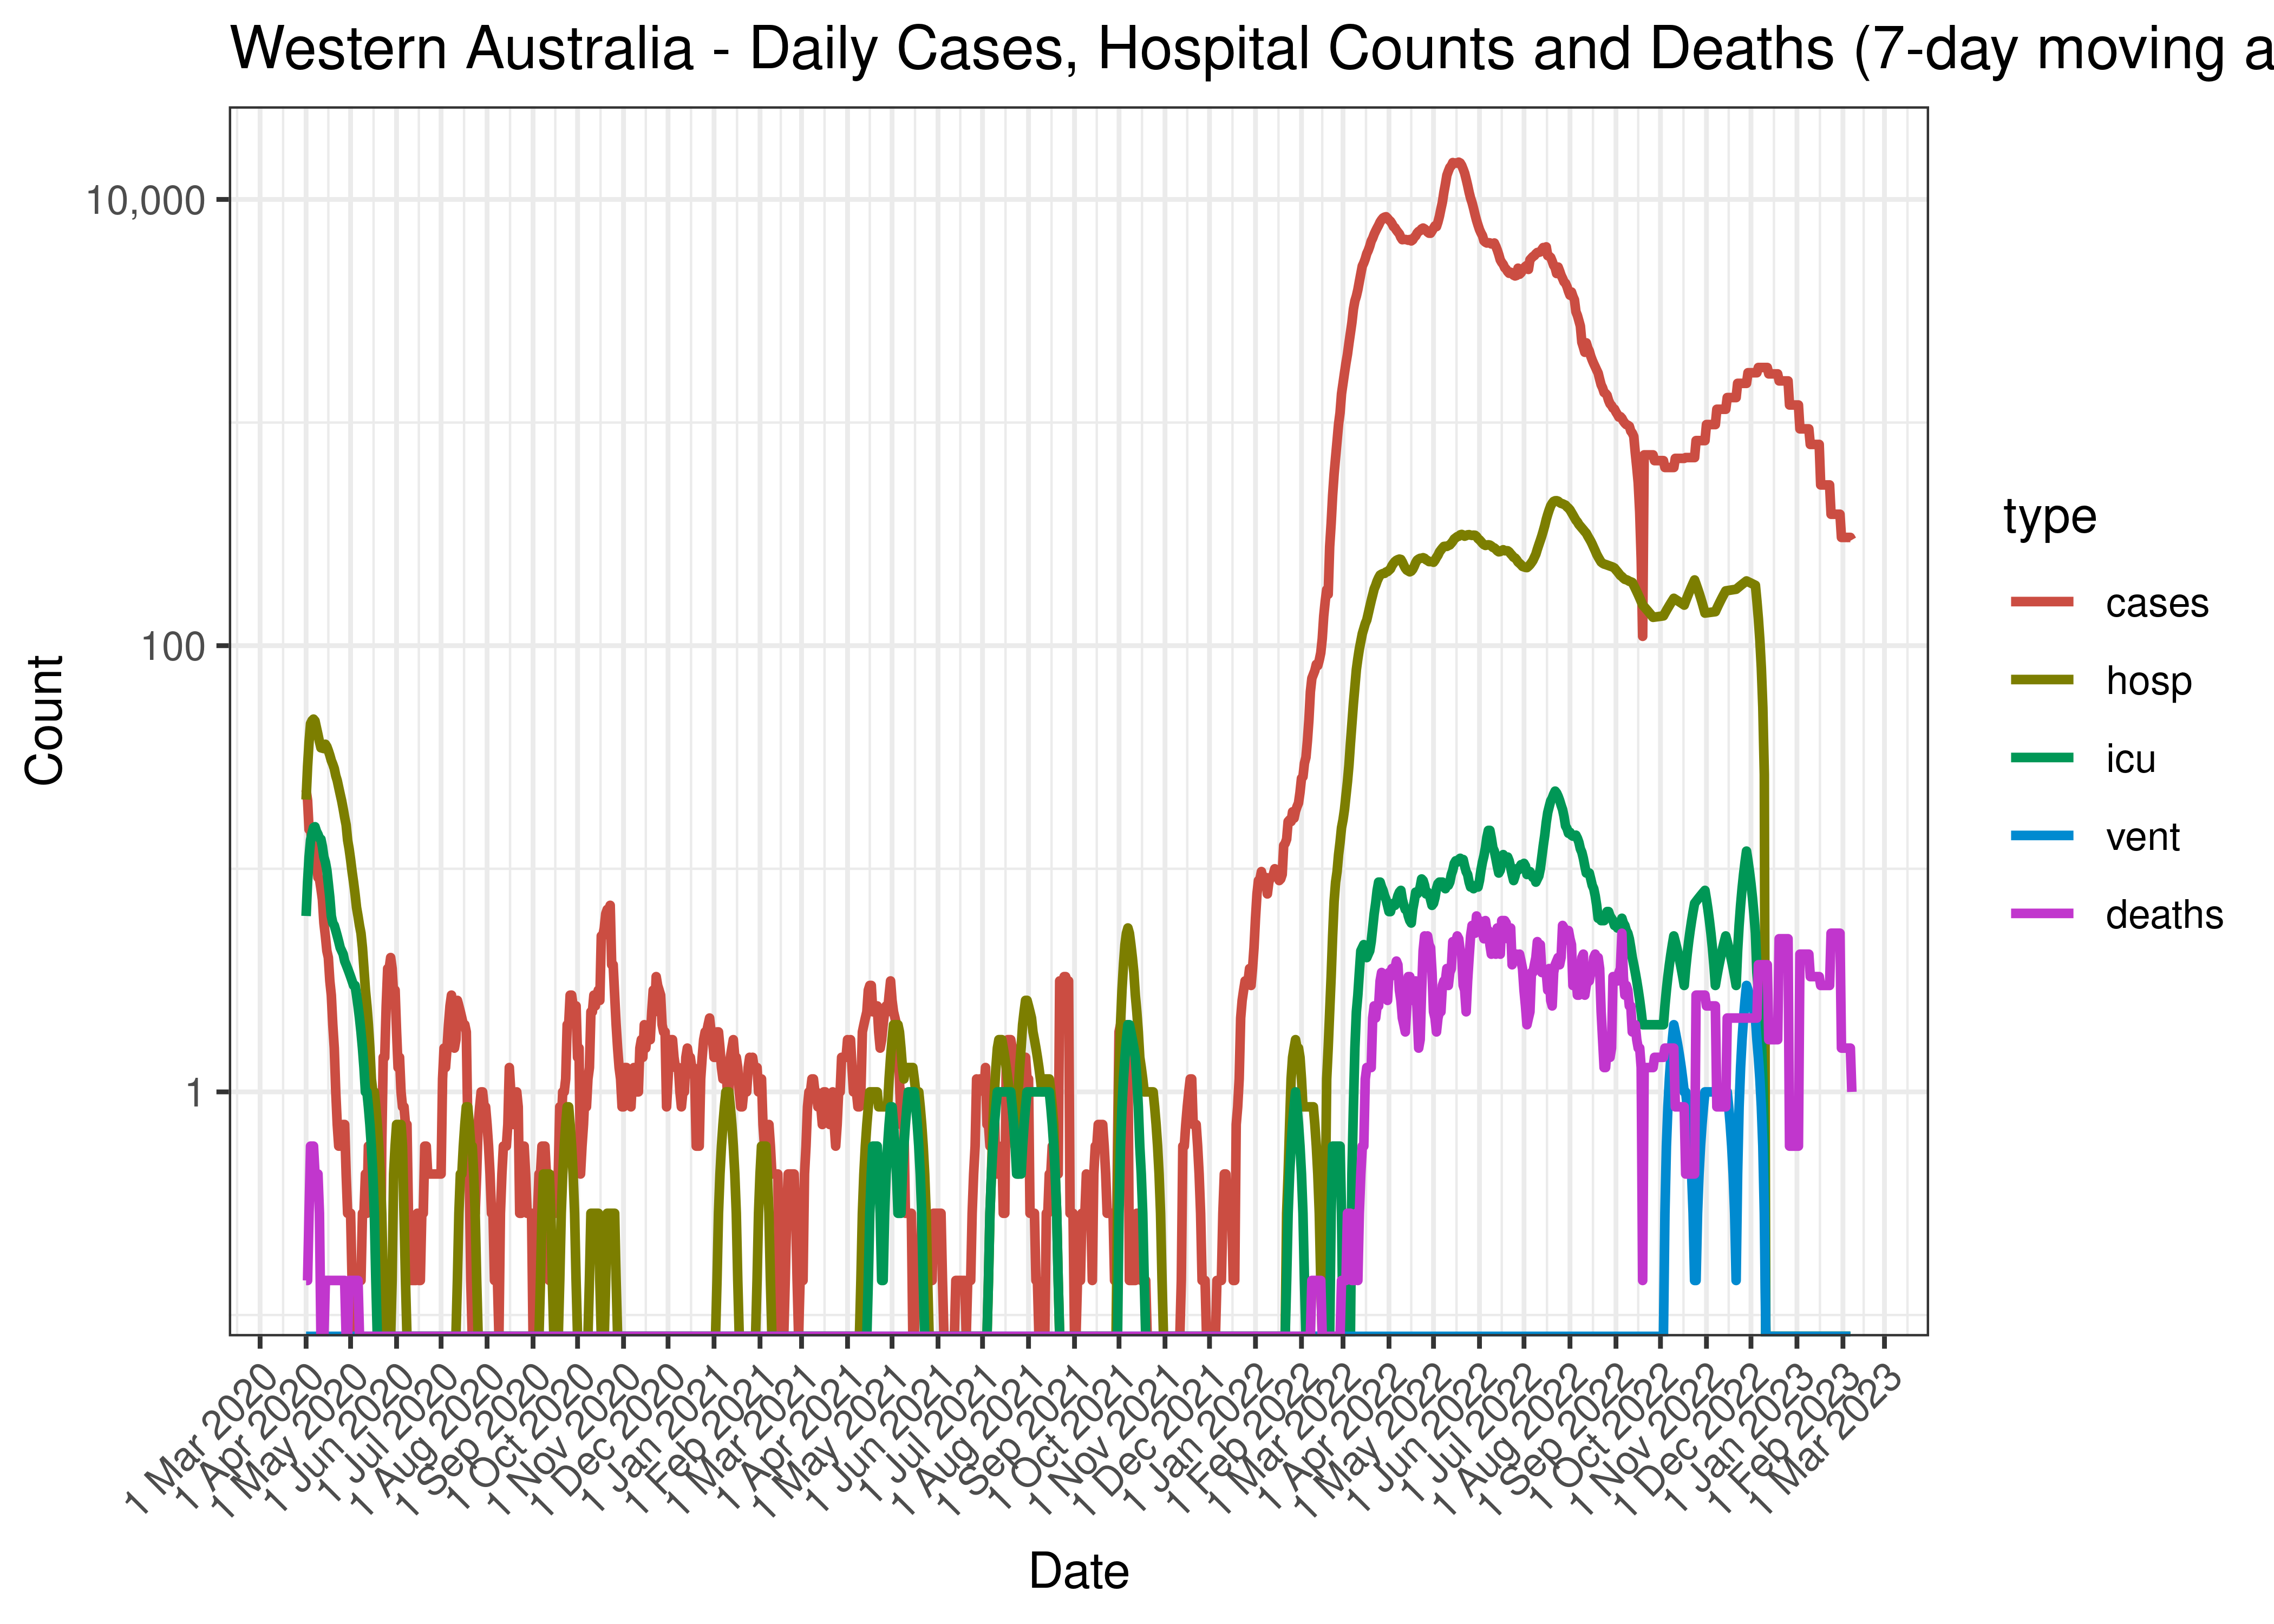 Western Australia - Daily Cases, Hospital Counts and Deaths (7-day moving average)